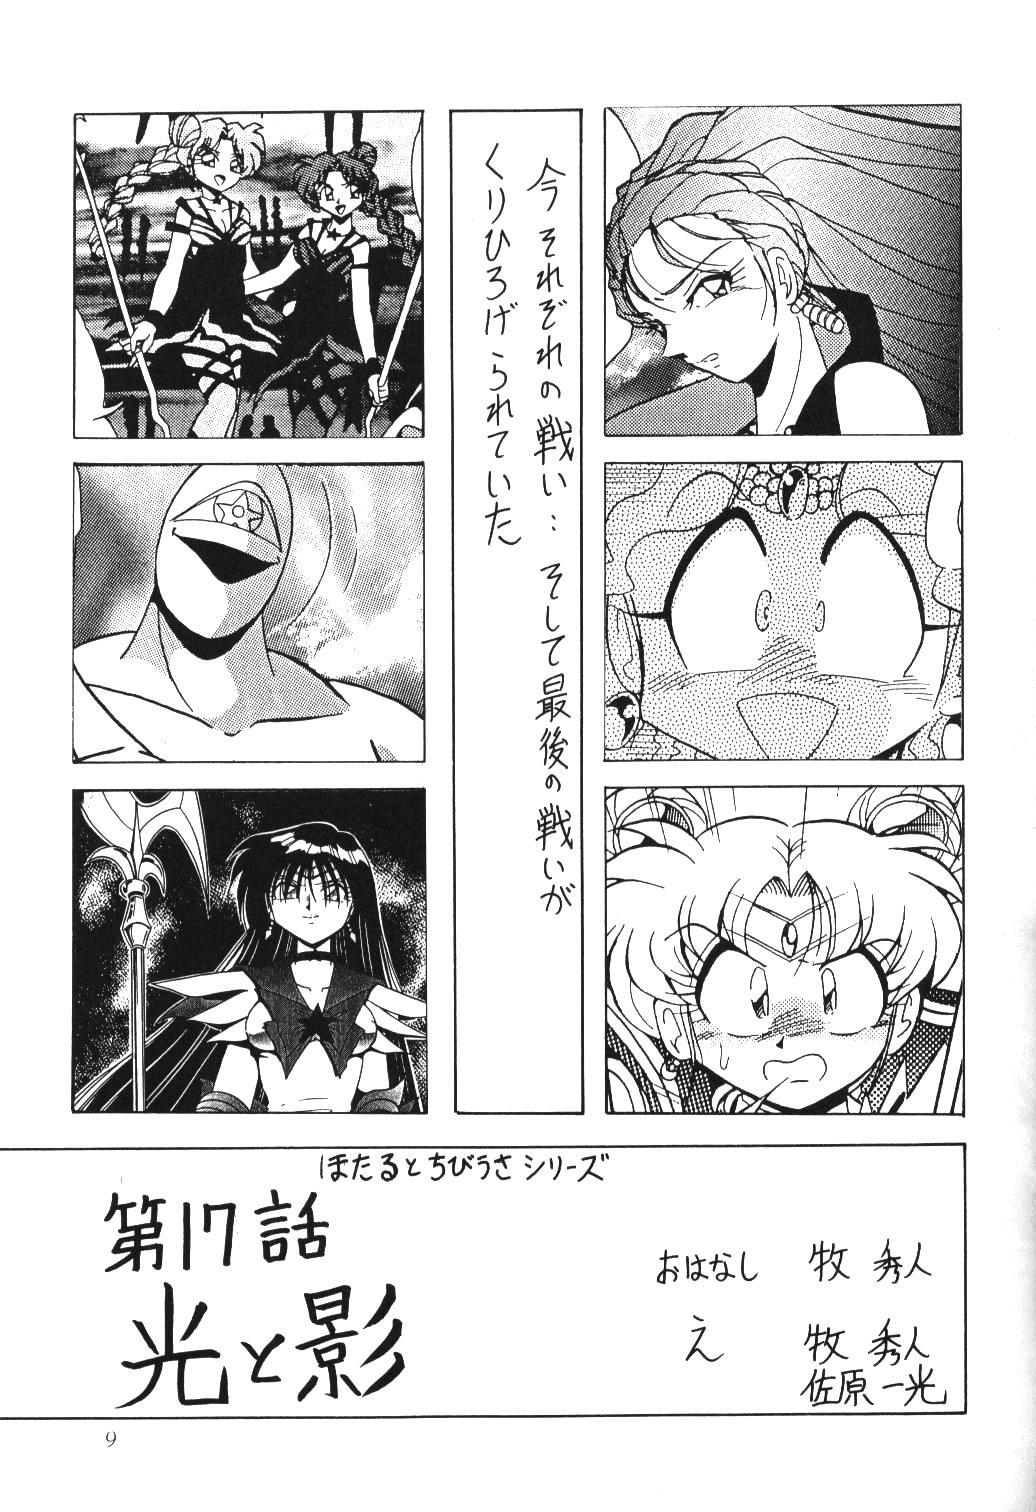 Free Rough Sex Porn Silent Saturn 10 - Sailor moon Camgirl - Page 7